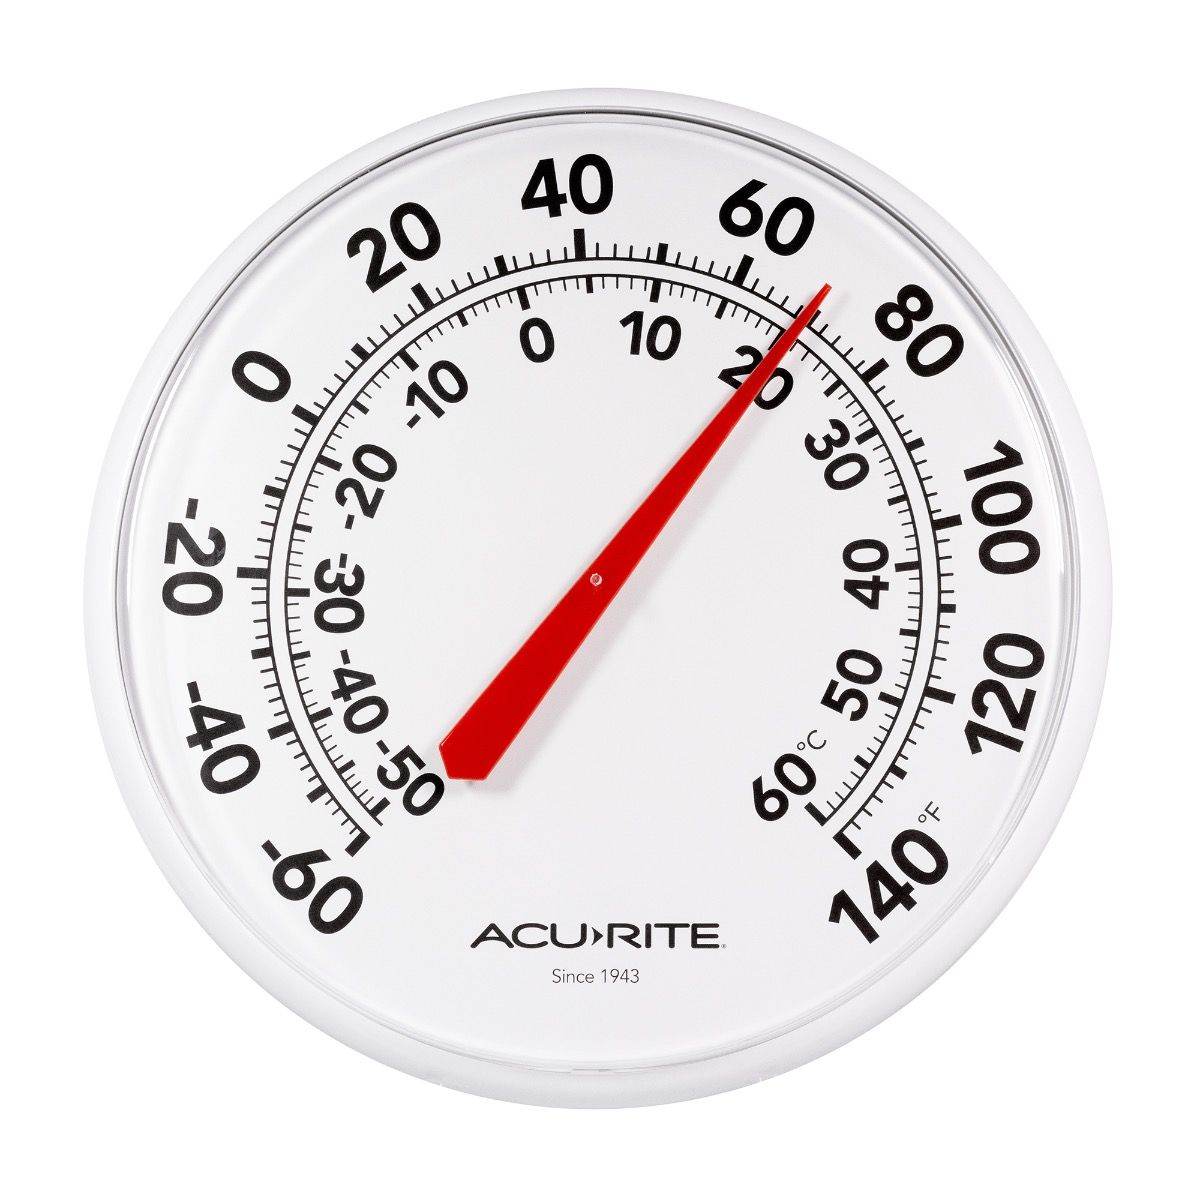 12.5-inch Fahrenheit or Celsius Thermometer